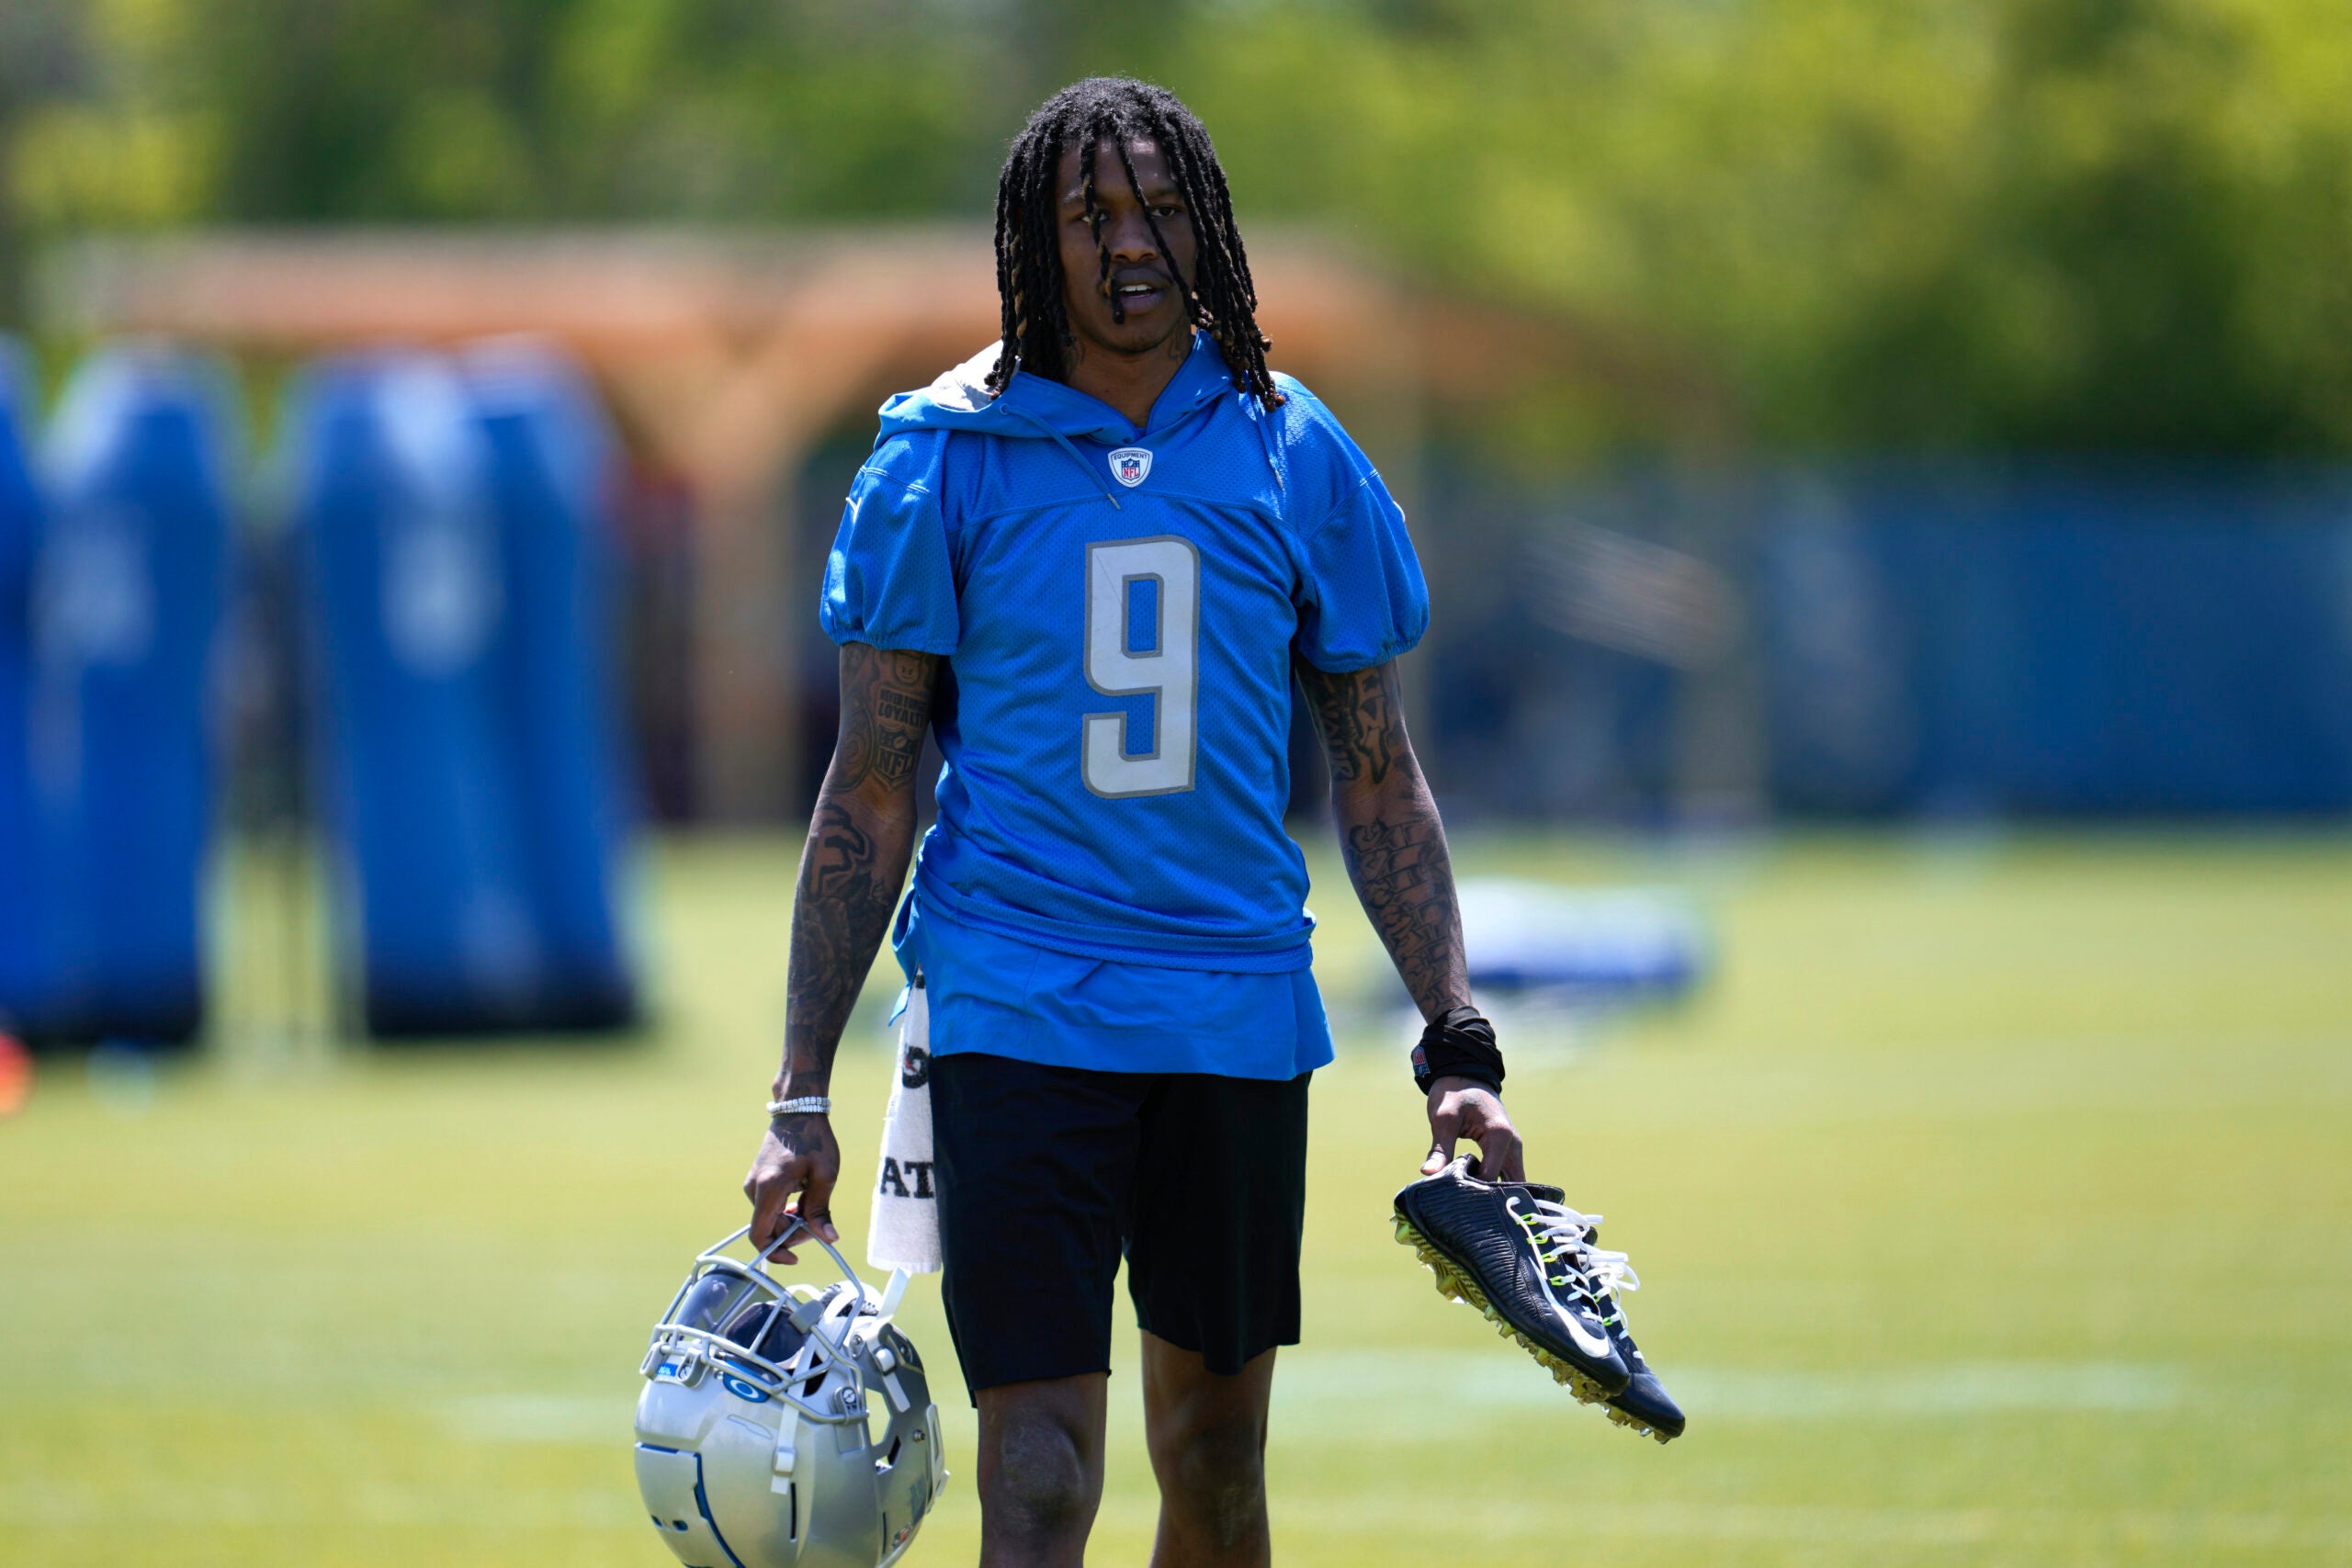 Detroit Lions wide receiver Jameson Williams (9) walks off the field after an NFL football practice.